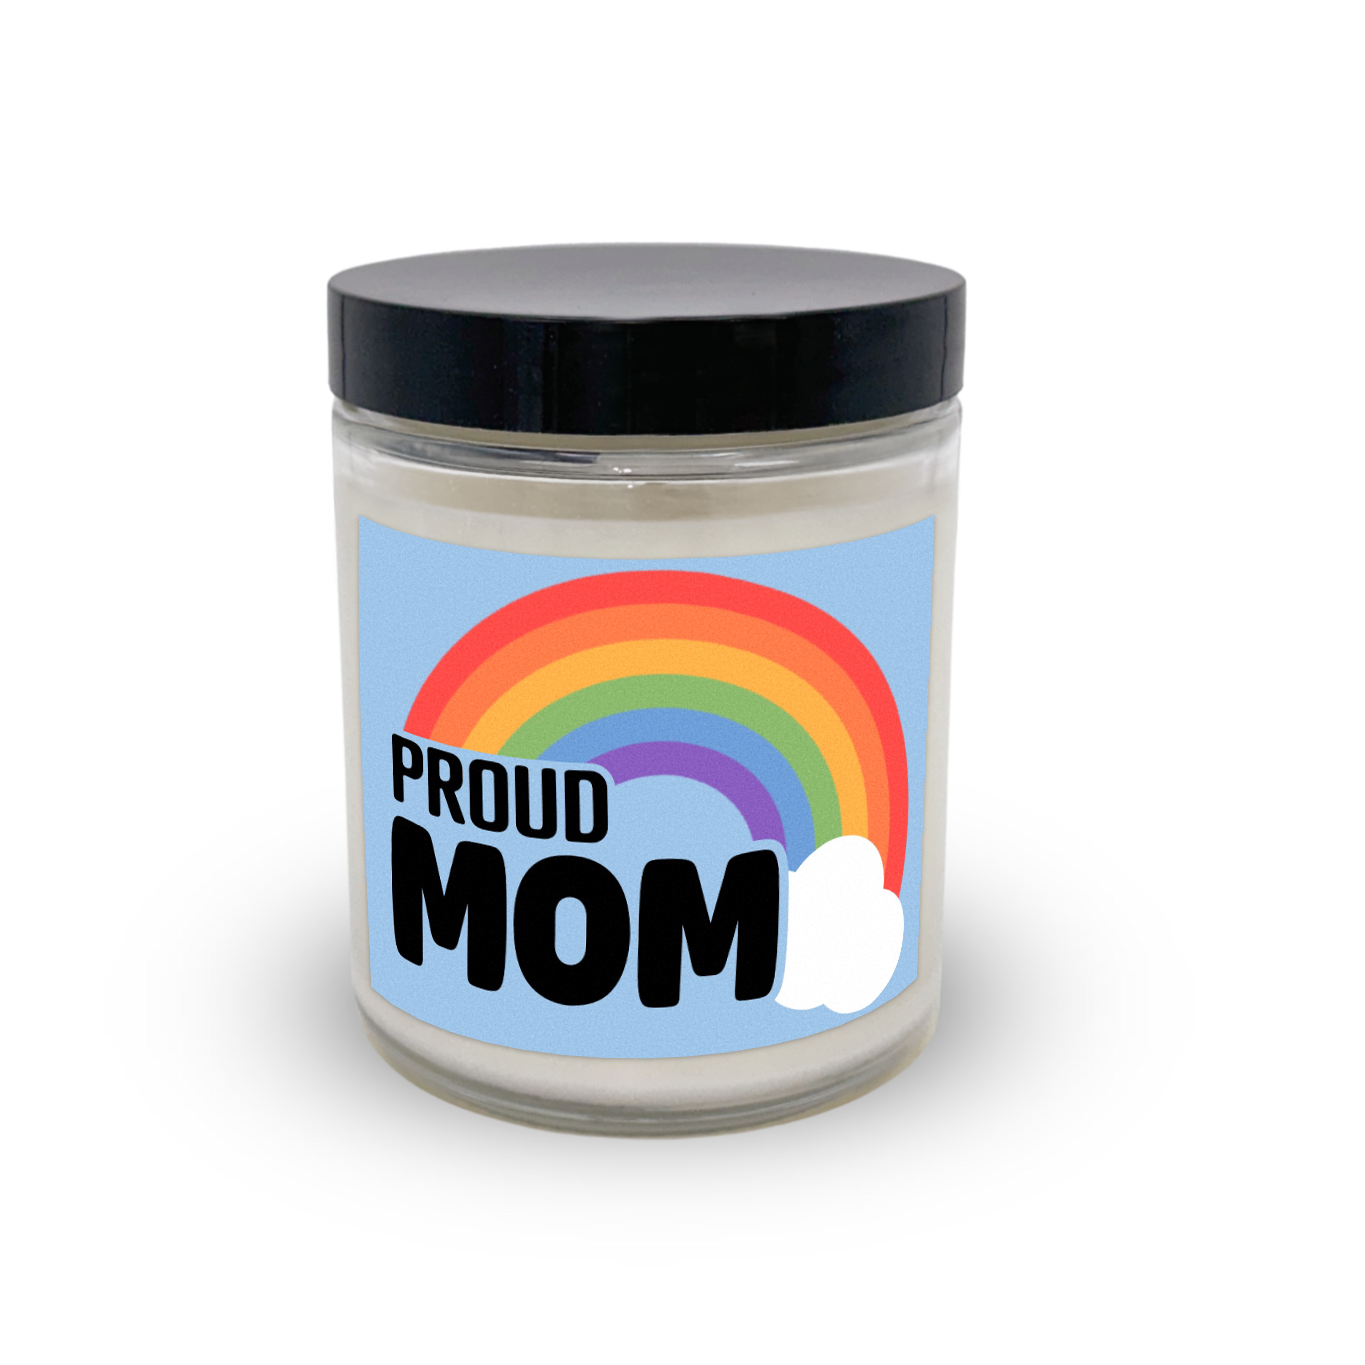 Proud Mom - Scented Candle